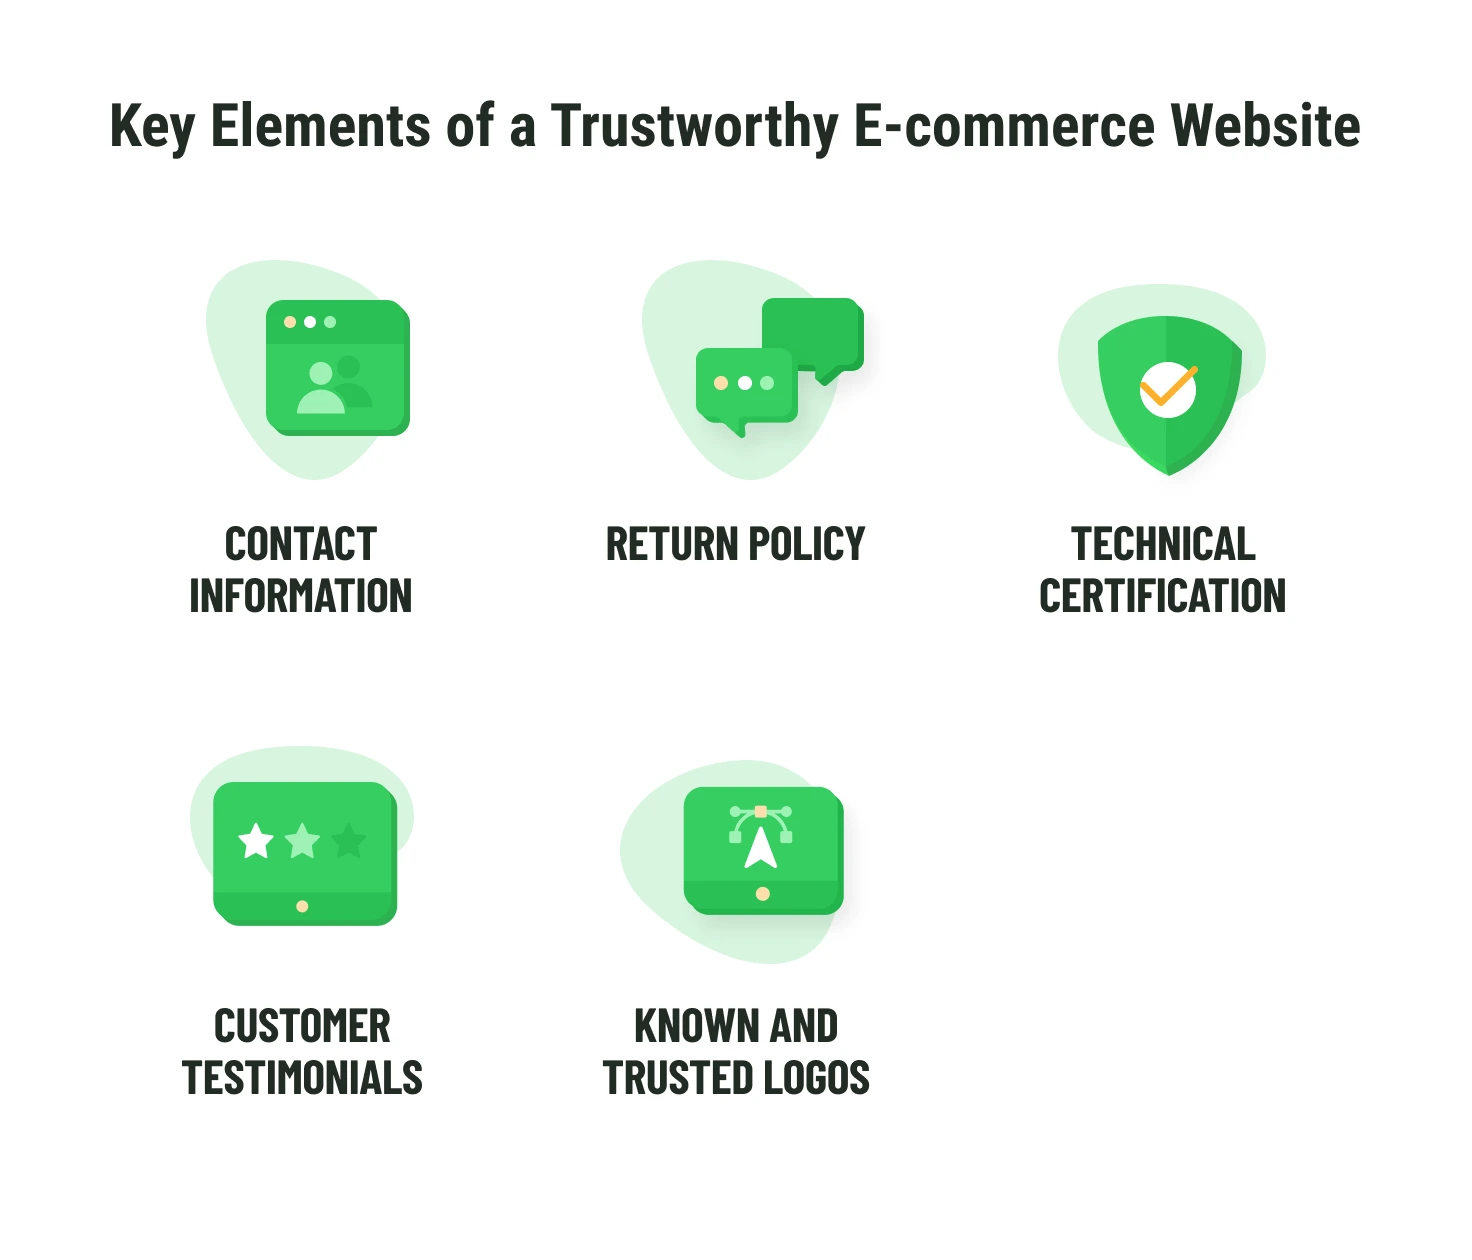 How to create a trustworthy E-commerce website